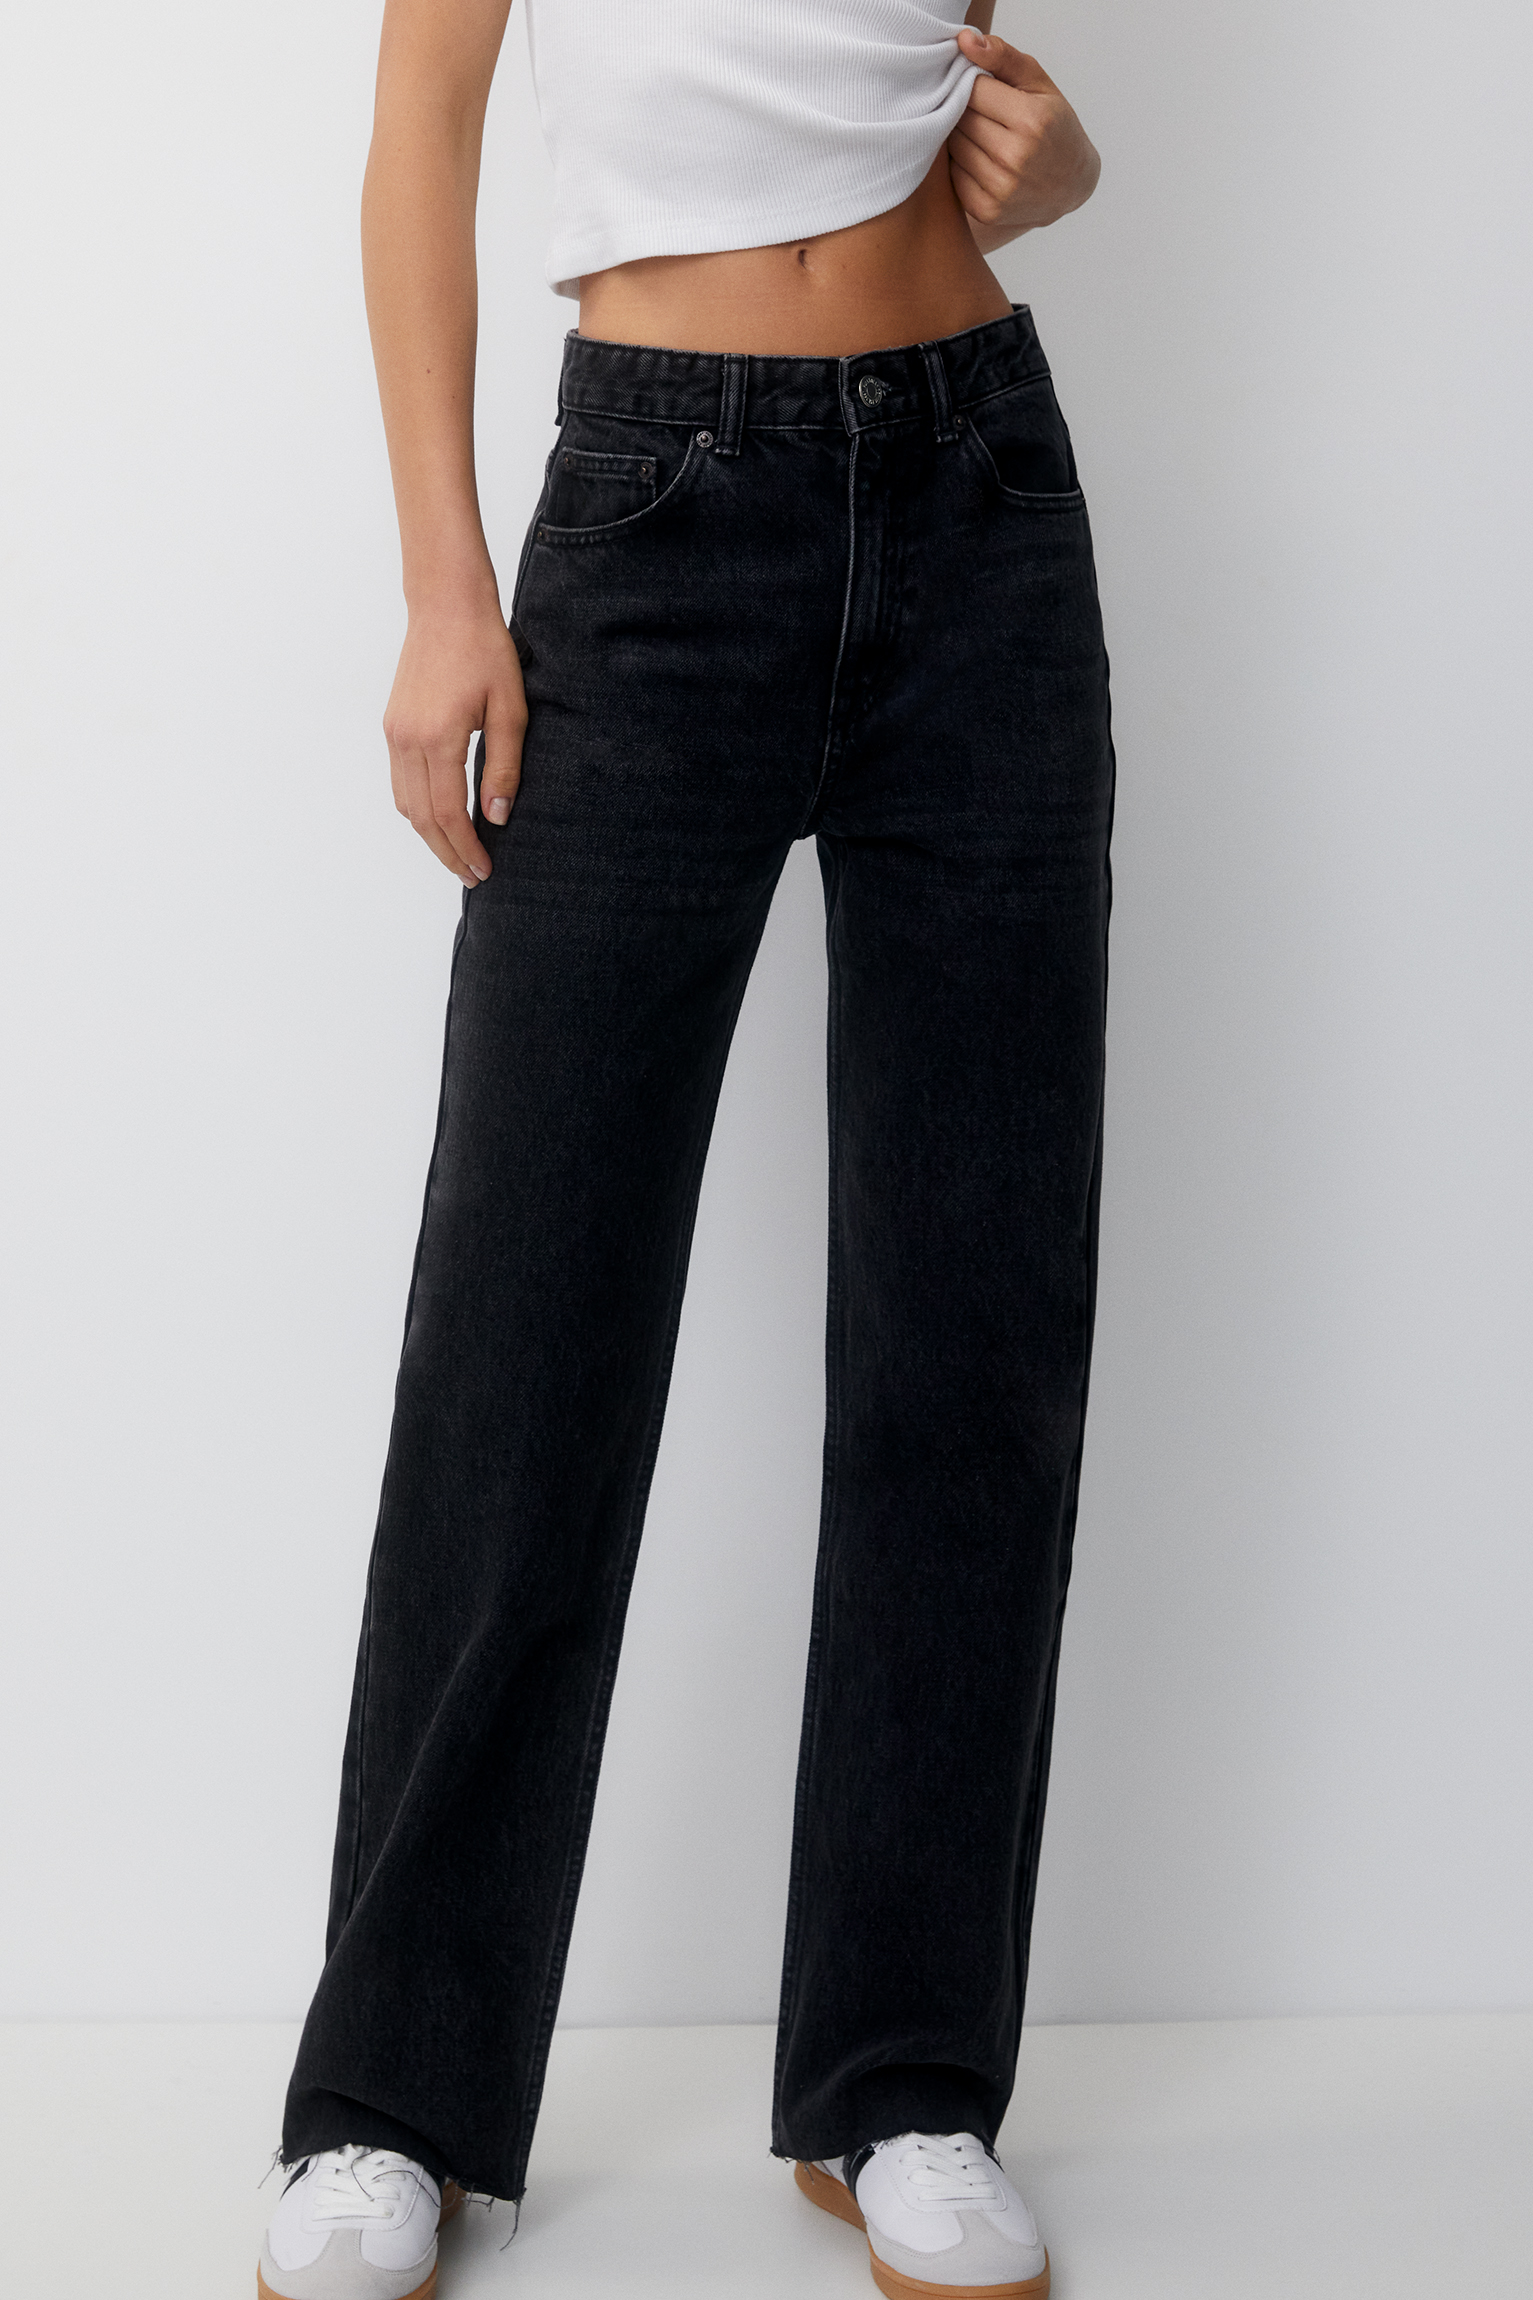 Oversize baggy jeans - pull&bear